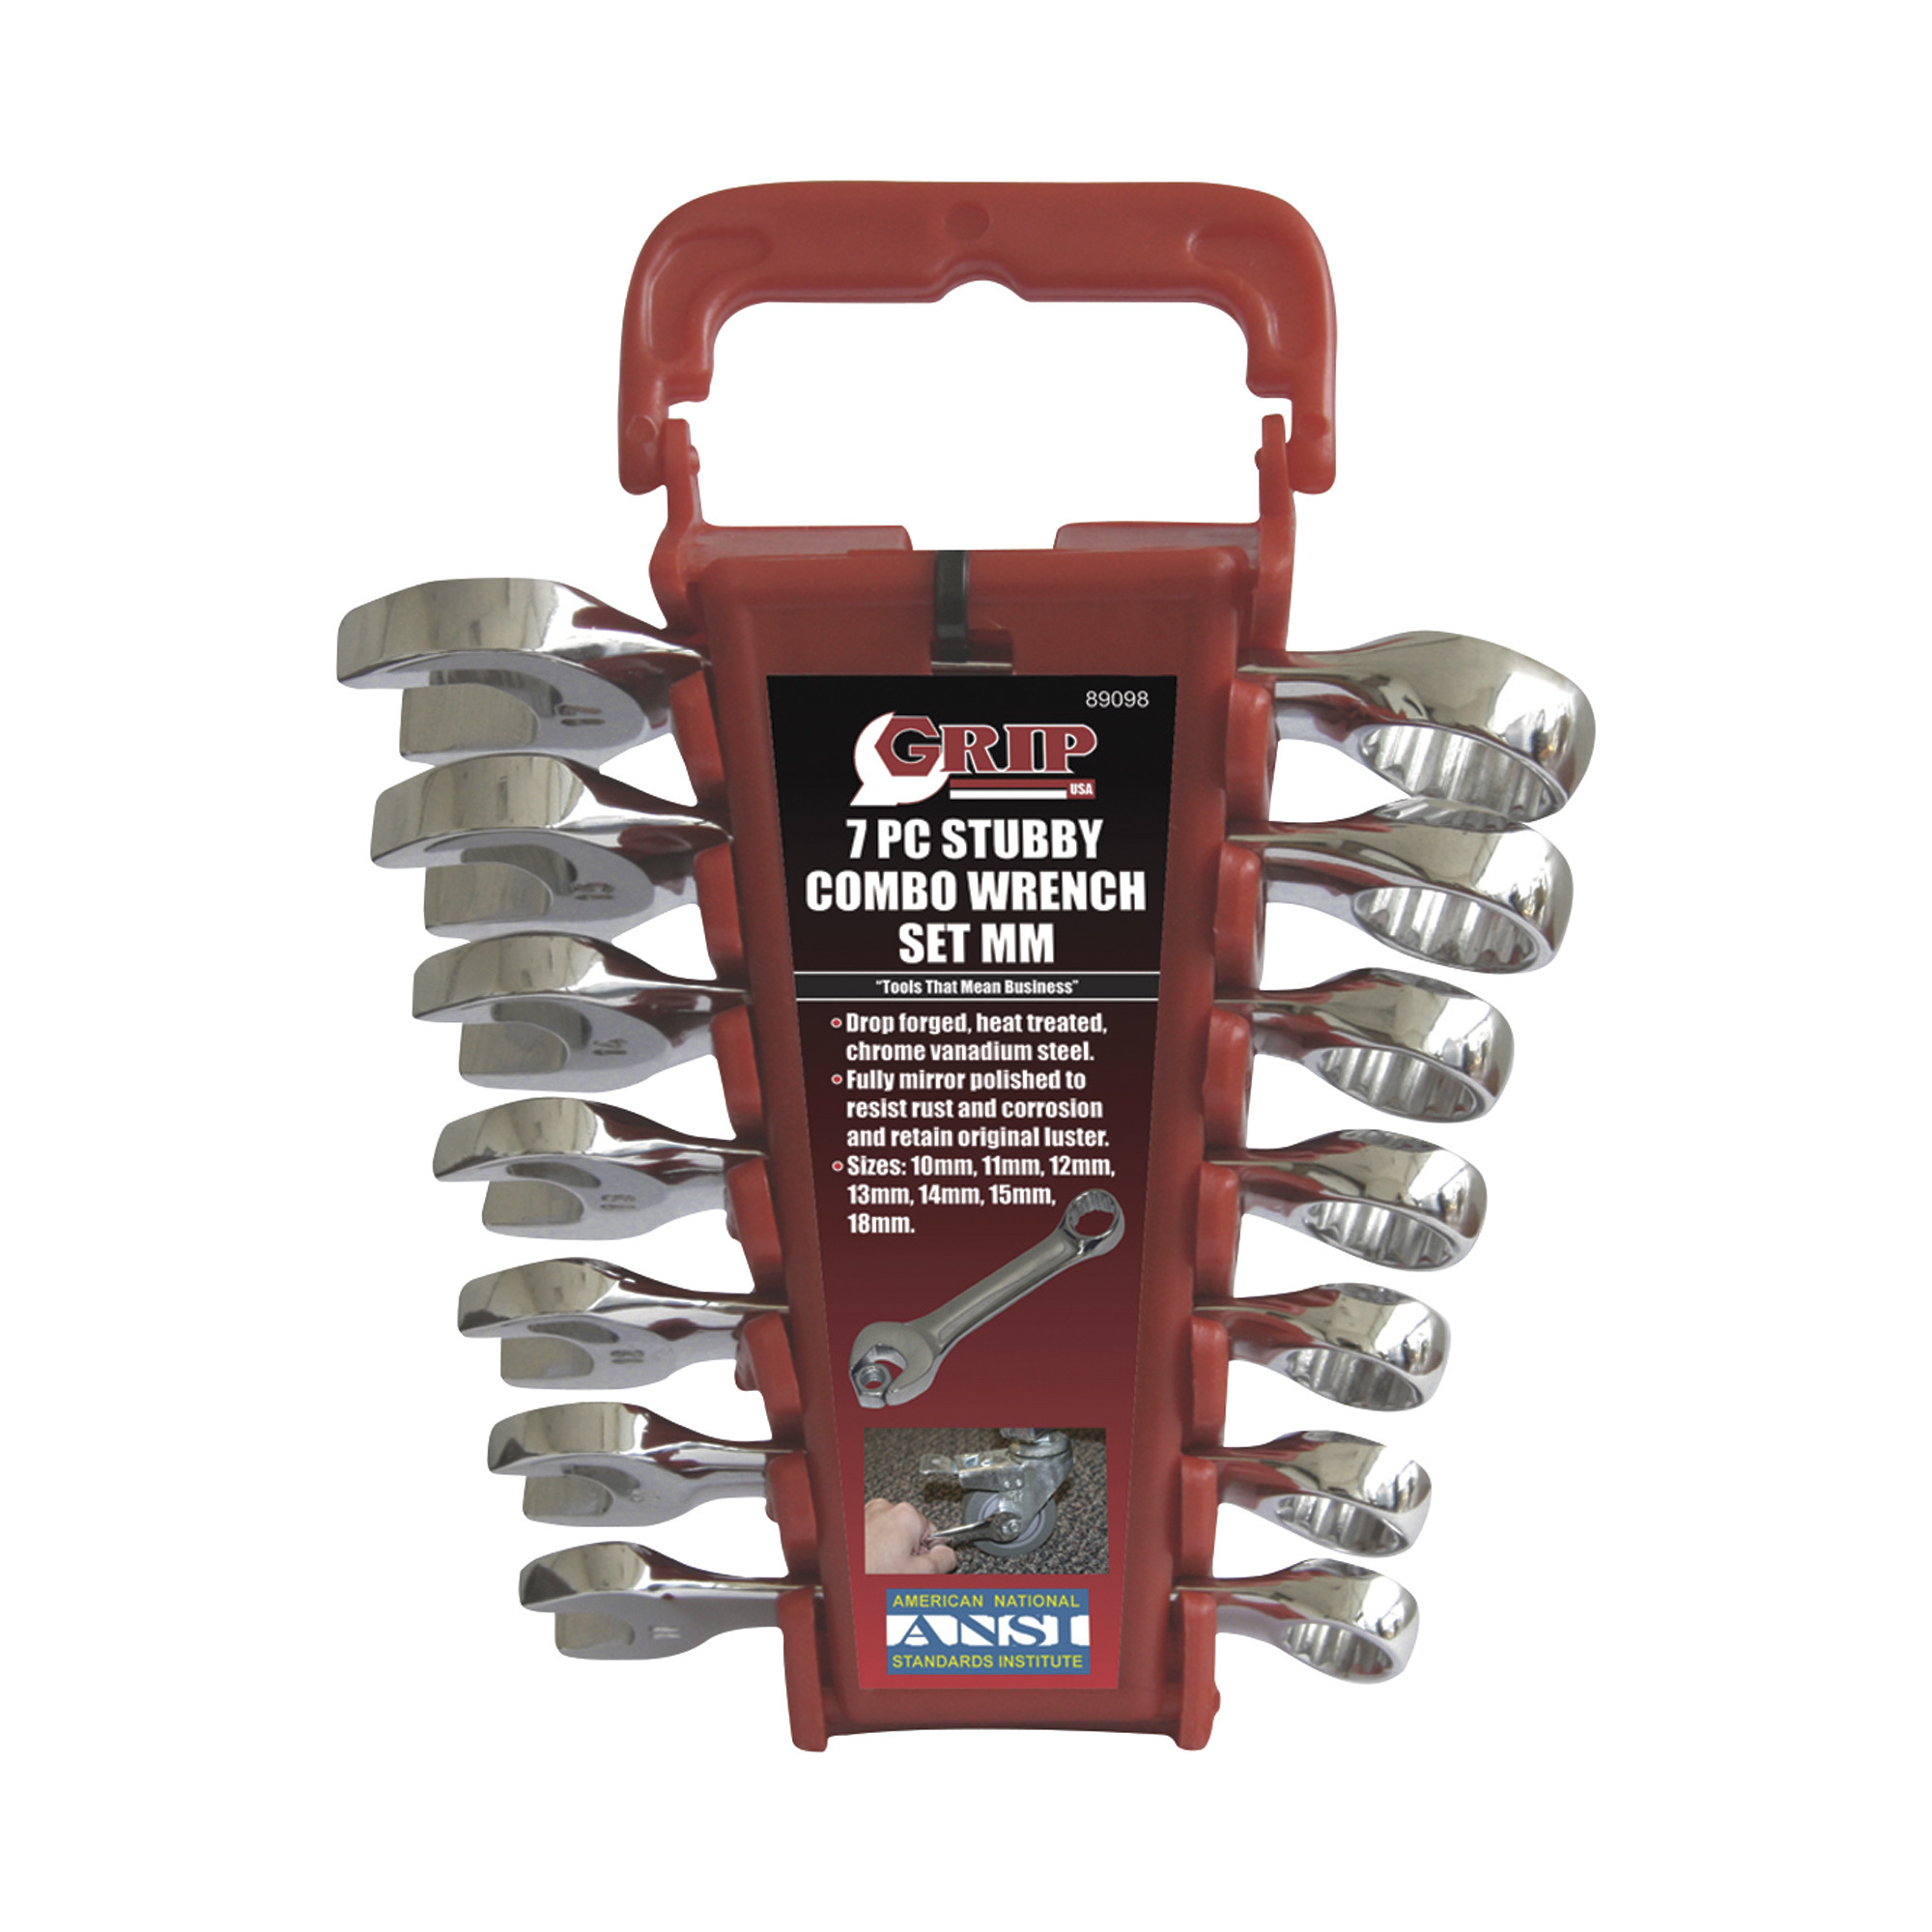 Grip-On Stubby Combo Wrench Set, 7-Piece, Metric, Model 89098